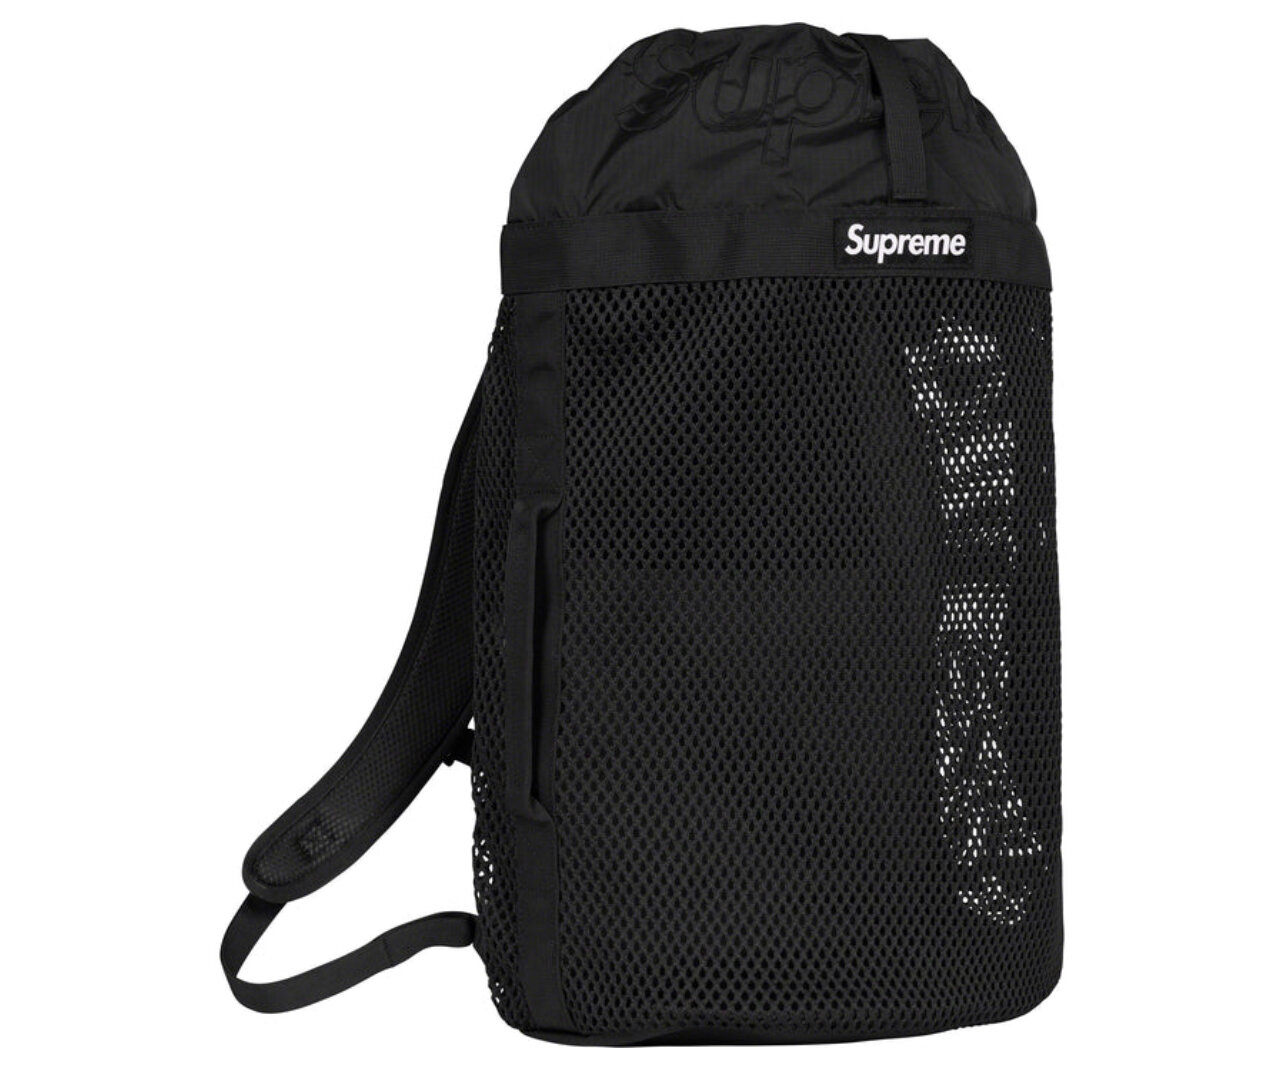 Supreme, Bags, Authentic Supreme Mesh Backpack